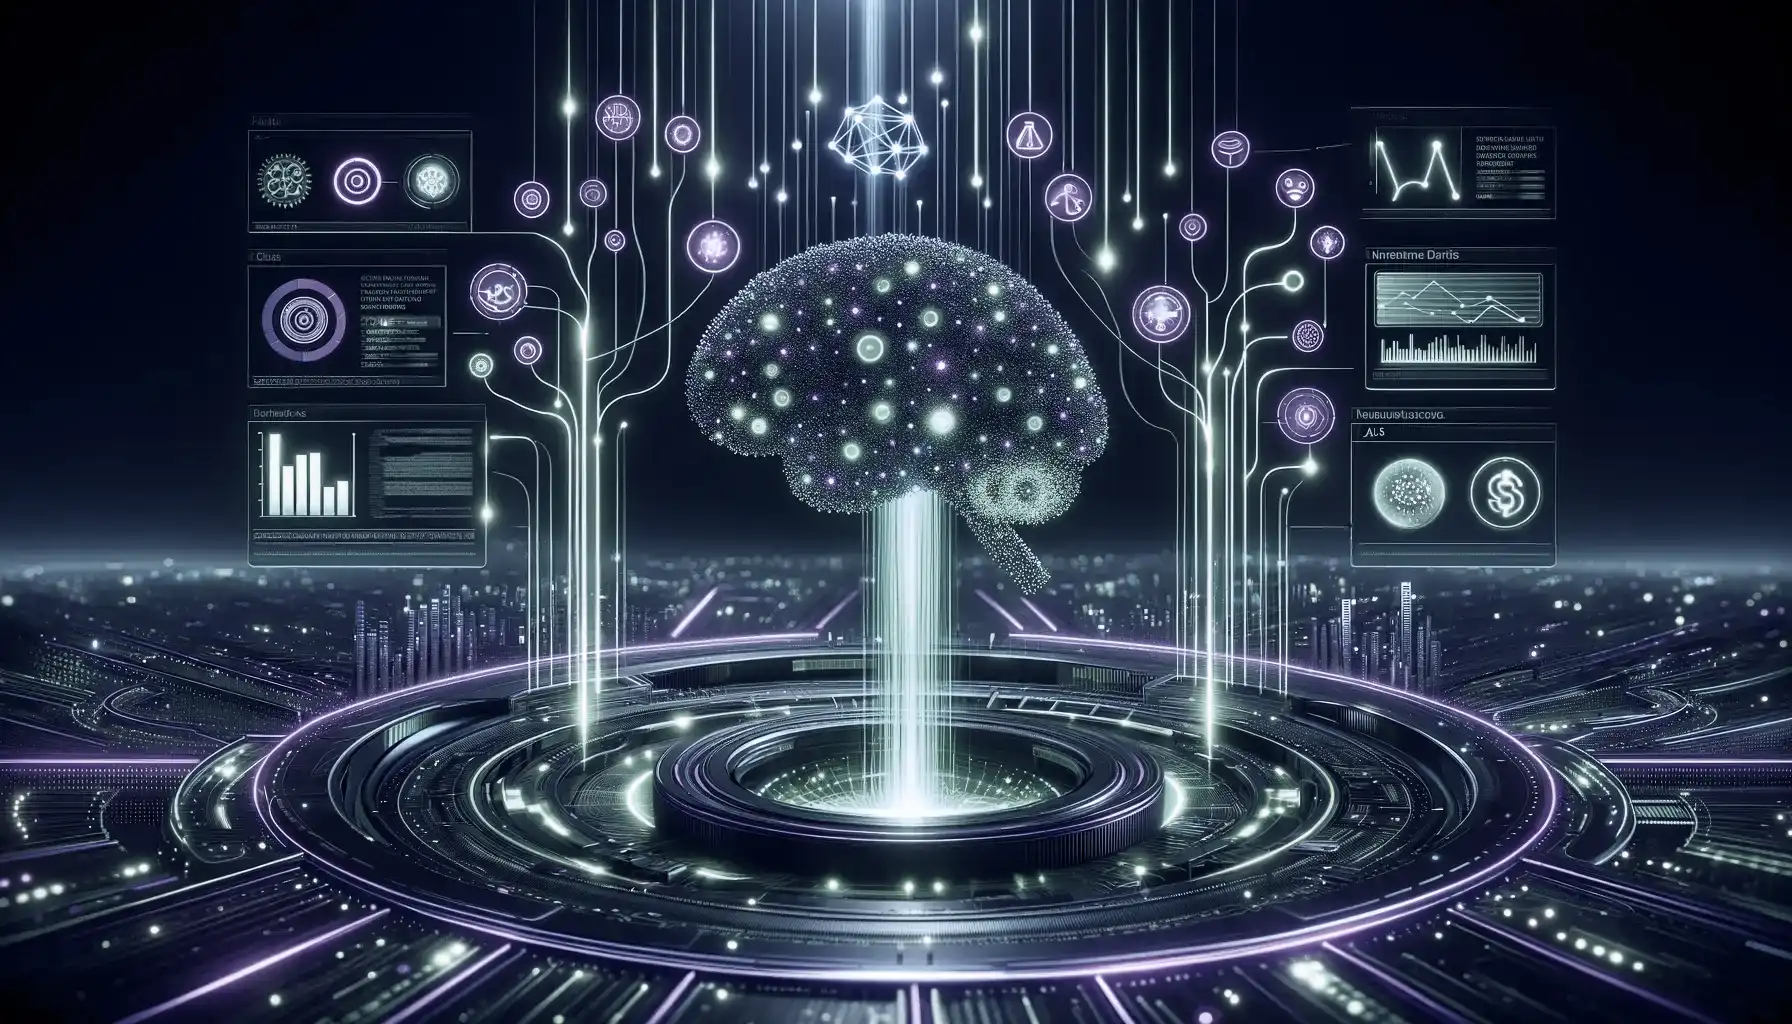 This 16x9 image captures how artificial intelligence (AI) empowers businesses to make informed investment decisions with greater clarity, speed, and confidence. It depicts an advanced digital environment where streams of data, illuminated in green and purple neon lights, funnel into a central hub or brain-like structure. This central hub symbolizes the analytical power of AI, processing vast amounts of data to provide valuable insights. The branching pathways emanating from the hub represent various decision outcomes, highlighting the transformative impact of AI on investment strategies. The image visually communicates the flow of information and the significant role AI plays in enriching companies' decision-making capabilities with data-driven insights, enabling more effective and confident choices in business investments.